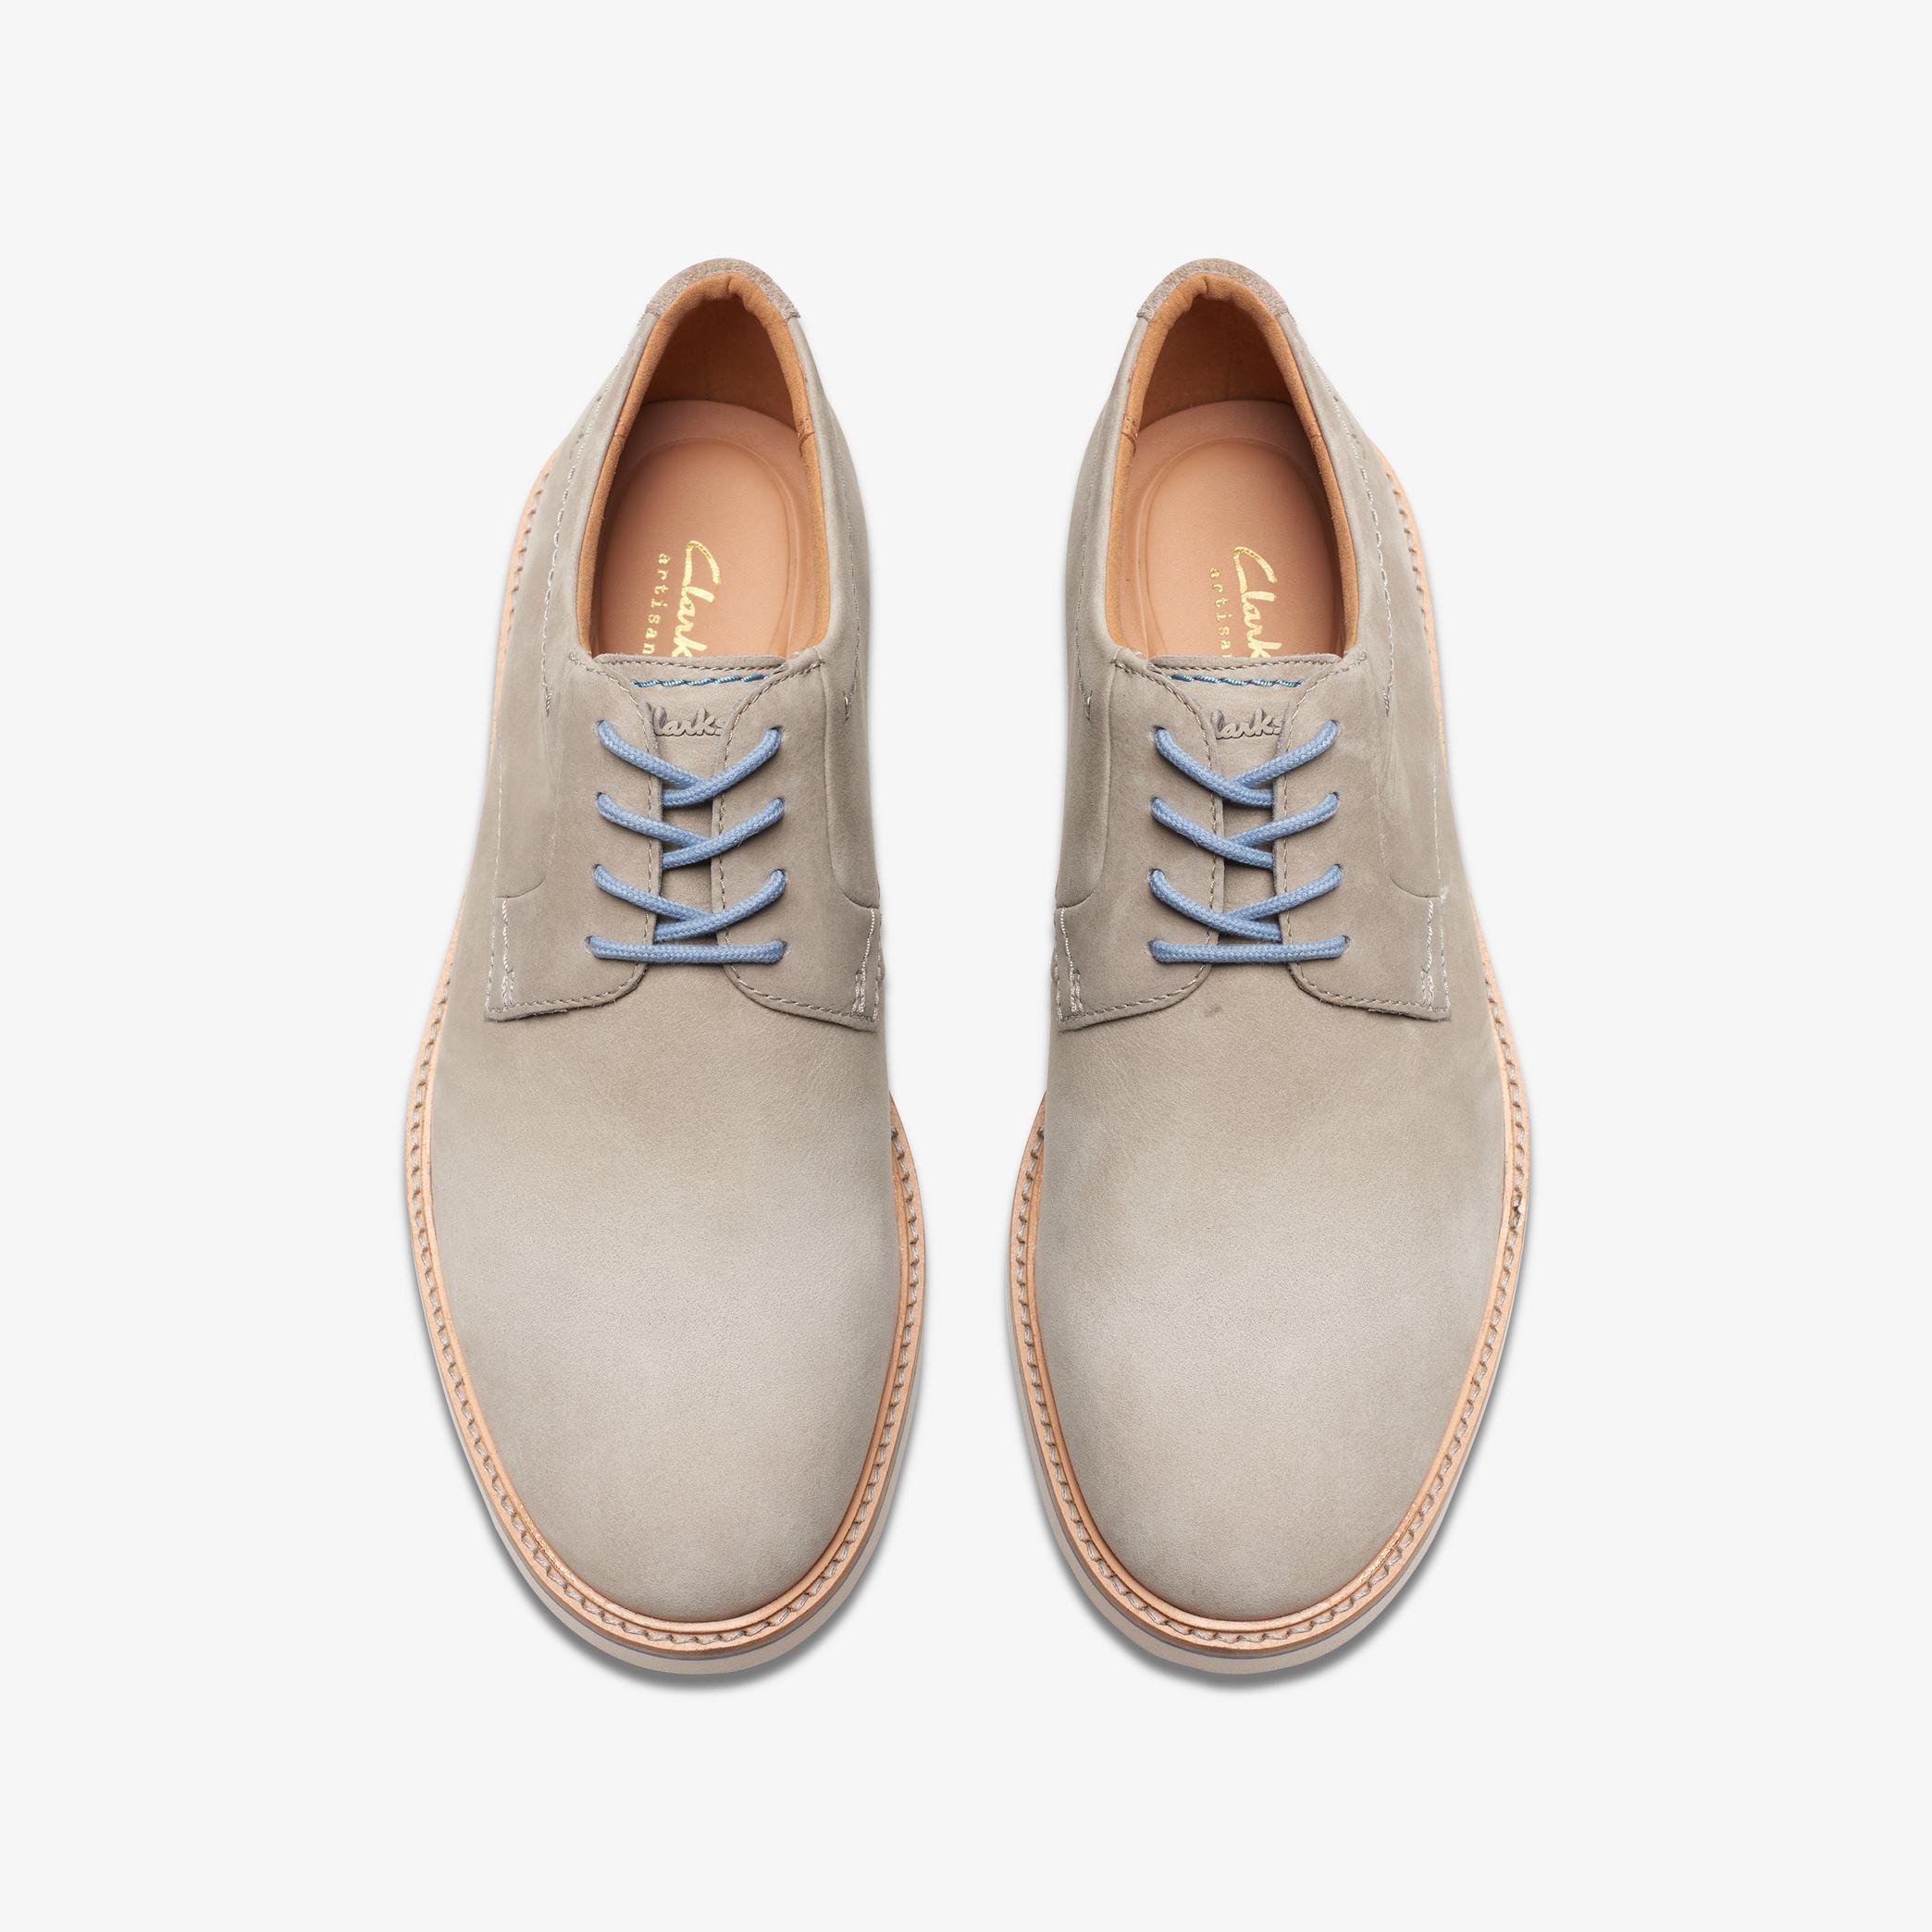 Atticus LT Lace Grey Nubuck Oxford Shoes, view 6 of 11